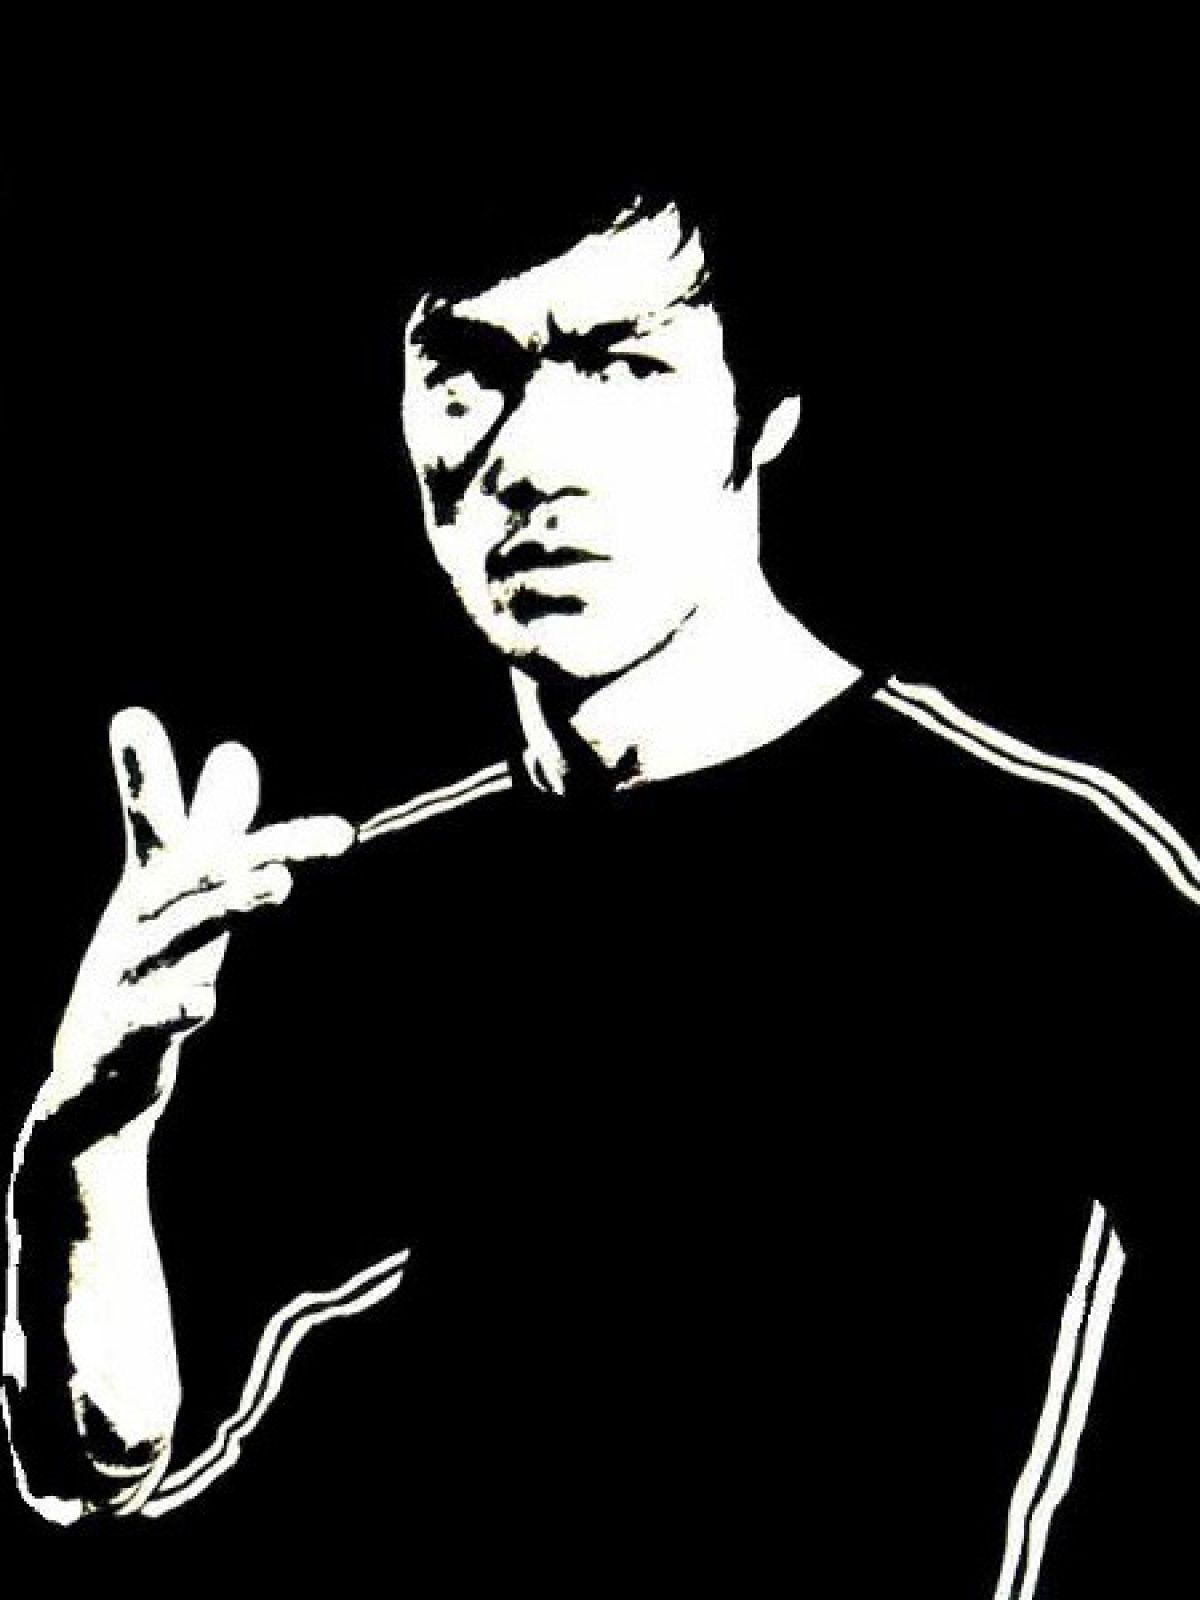 Latest Bruce Lee Wallpaper Android FULL HD 1920×1080 For PC Background. Bruce lee, Bruce lee photo, Samsung wallpaper